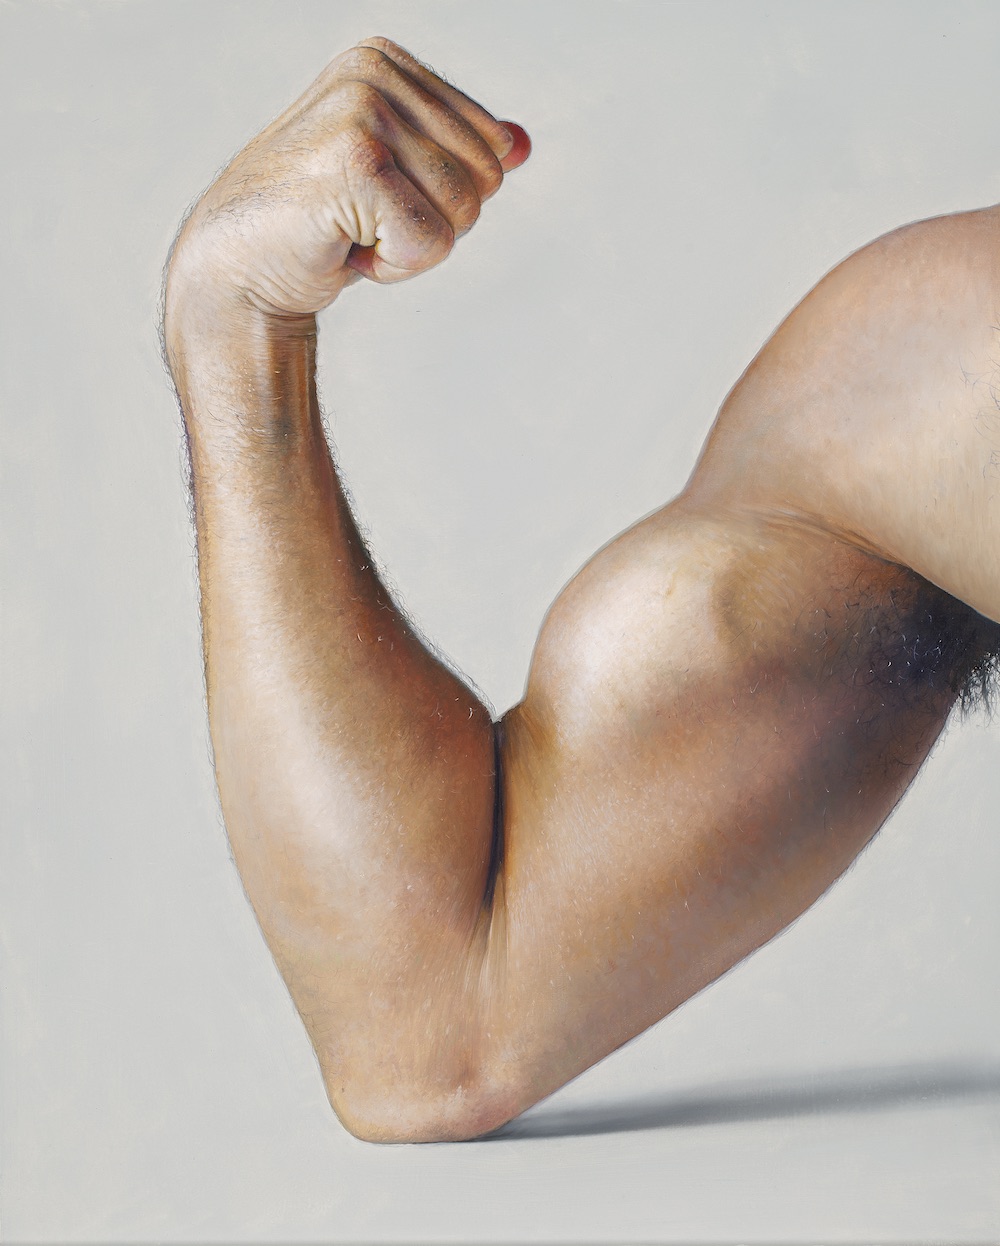 Michel Zavros, The Artist Flexes His Muscles, 2015. Private collection, courtesy the artist and Starkwhite, Auckland